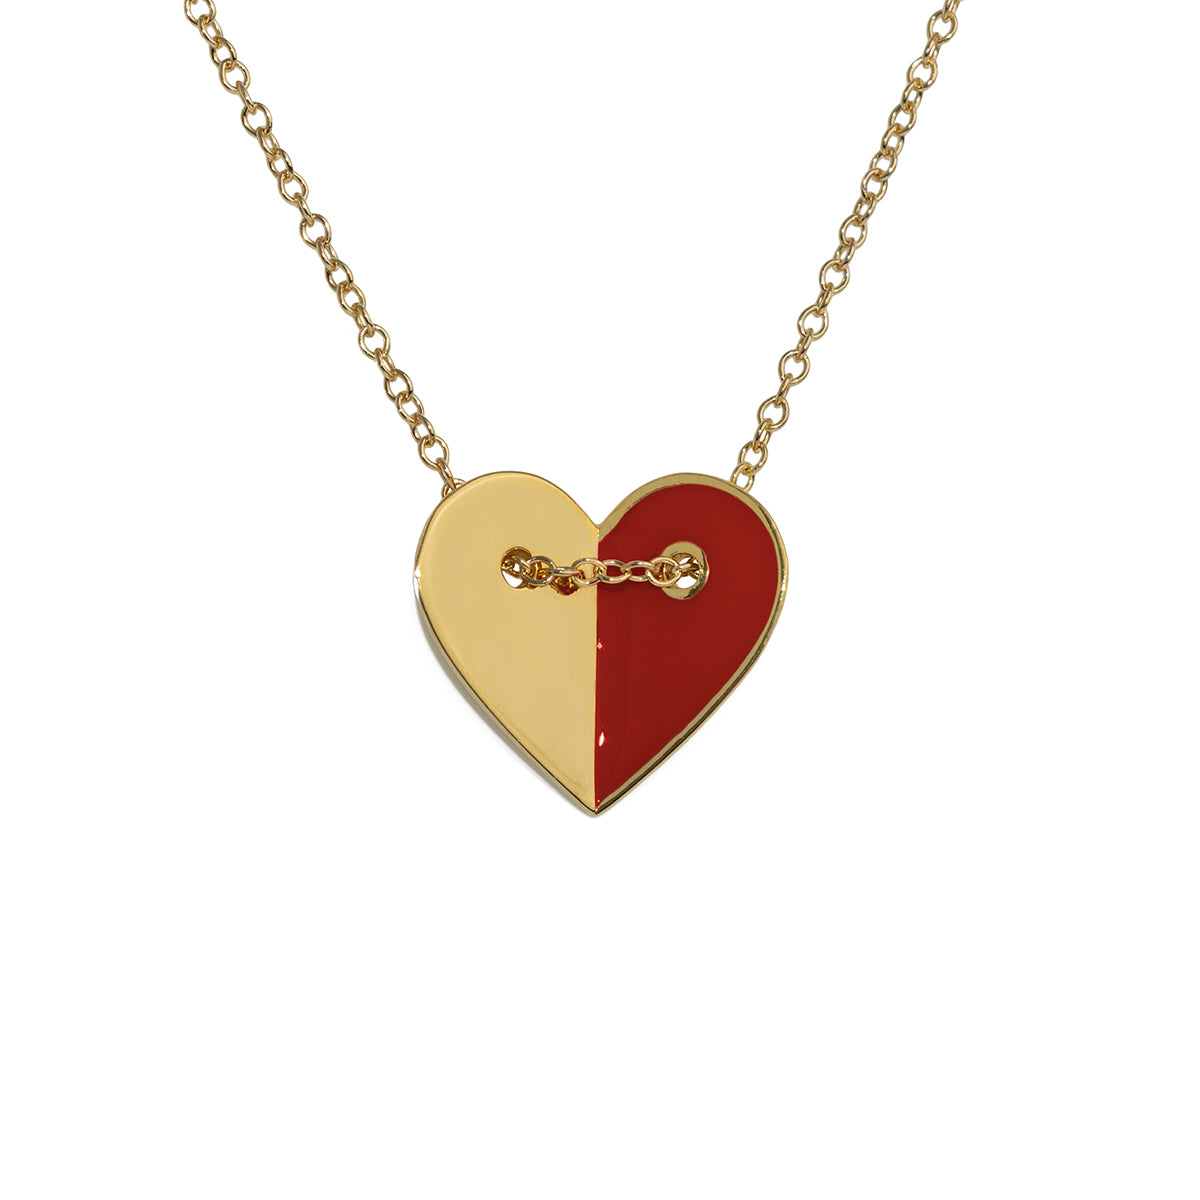 happy heart necklace gold with red enamel